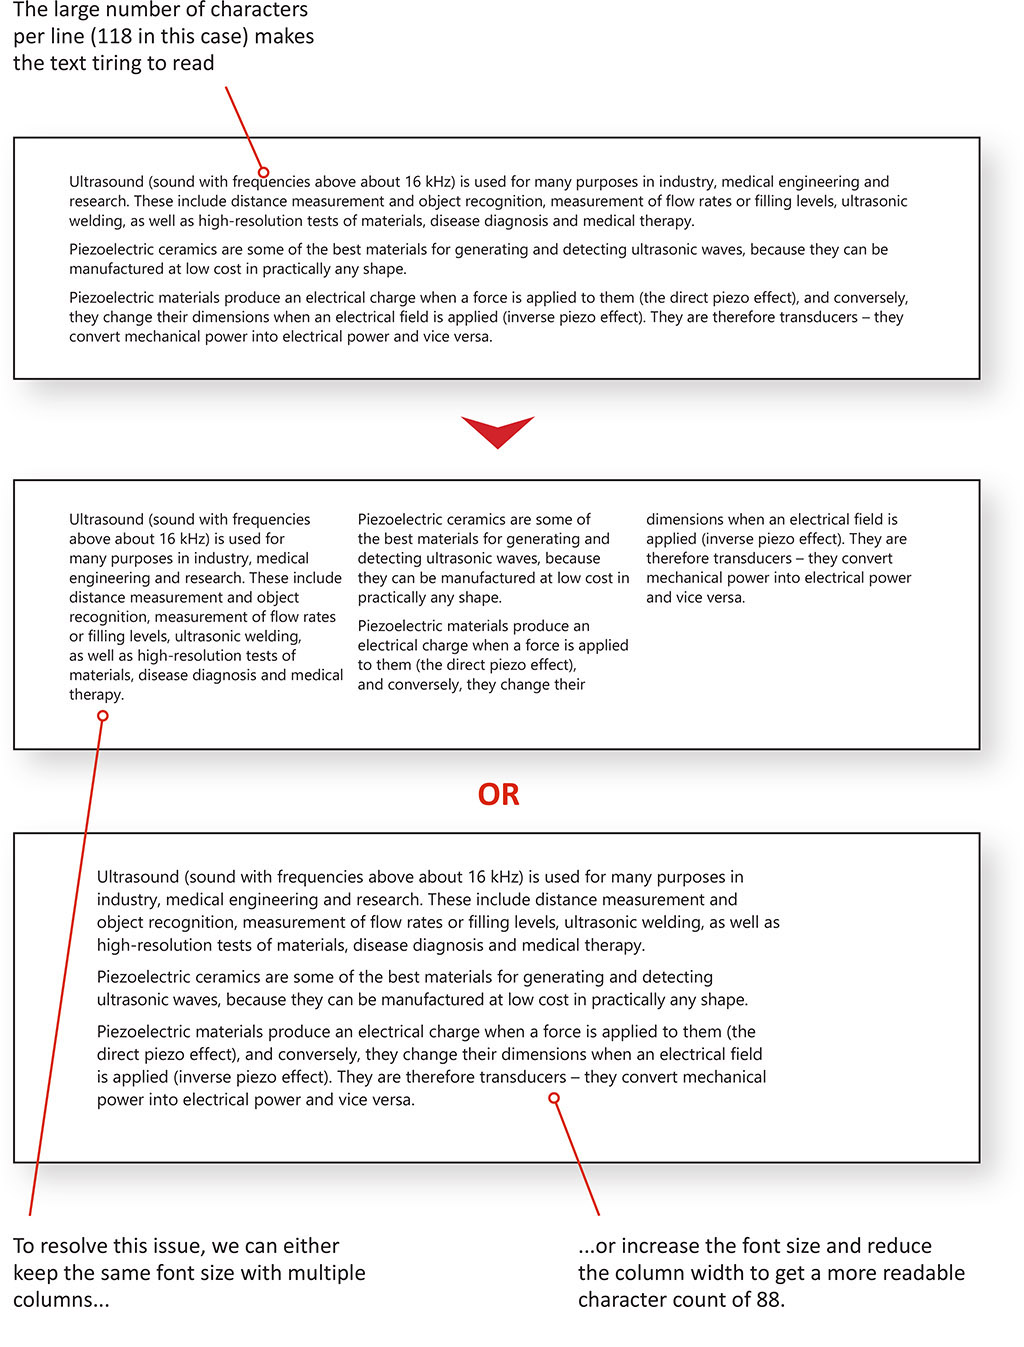 How to improve text layout for white paper using column formatting